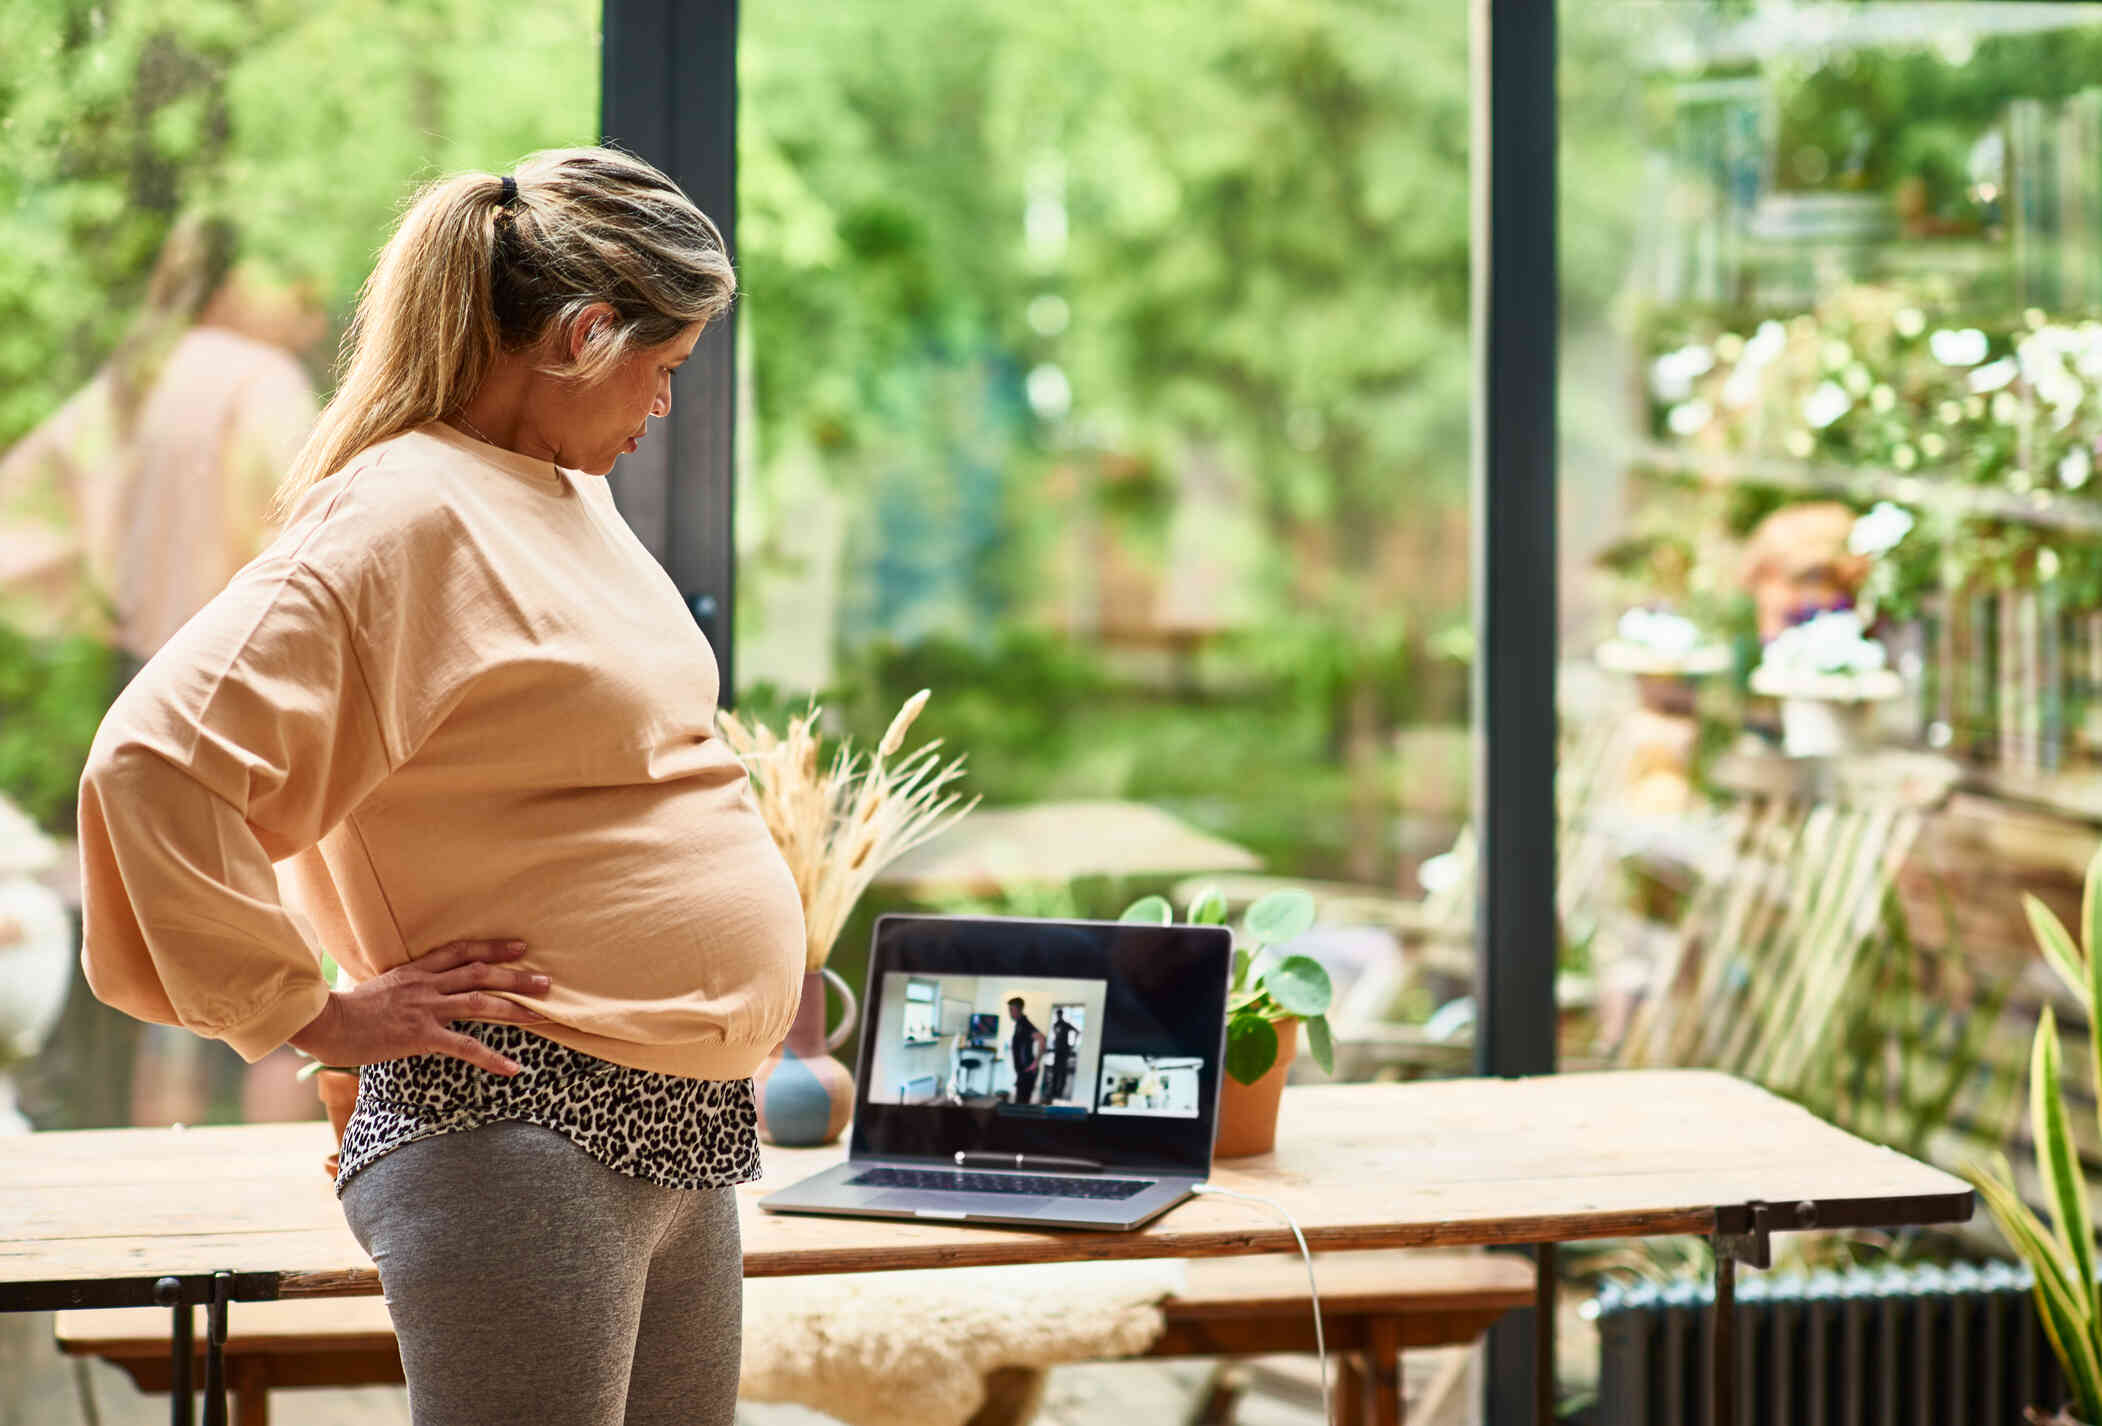 A pregnant woman has a video chat using a laptop on the table infront of her.